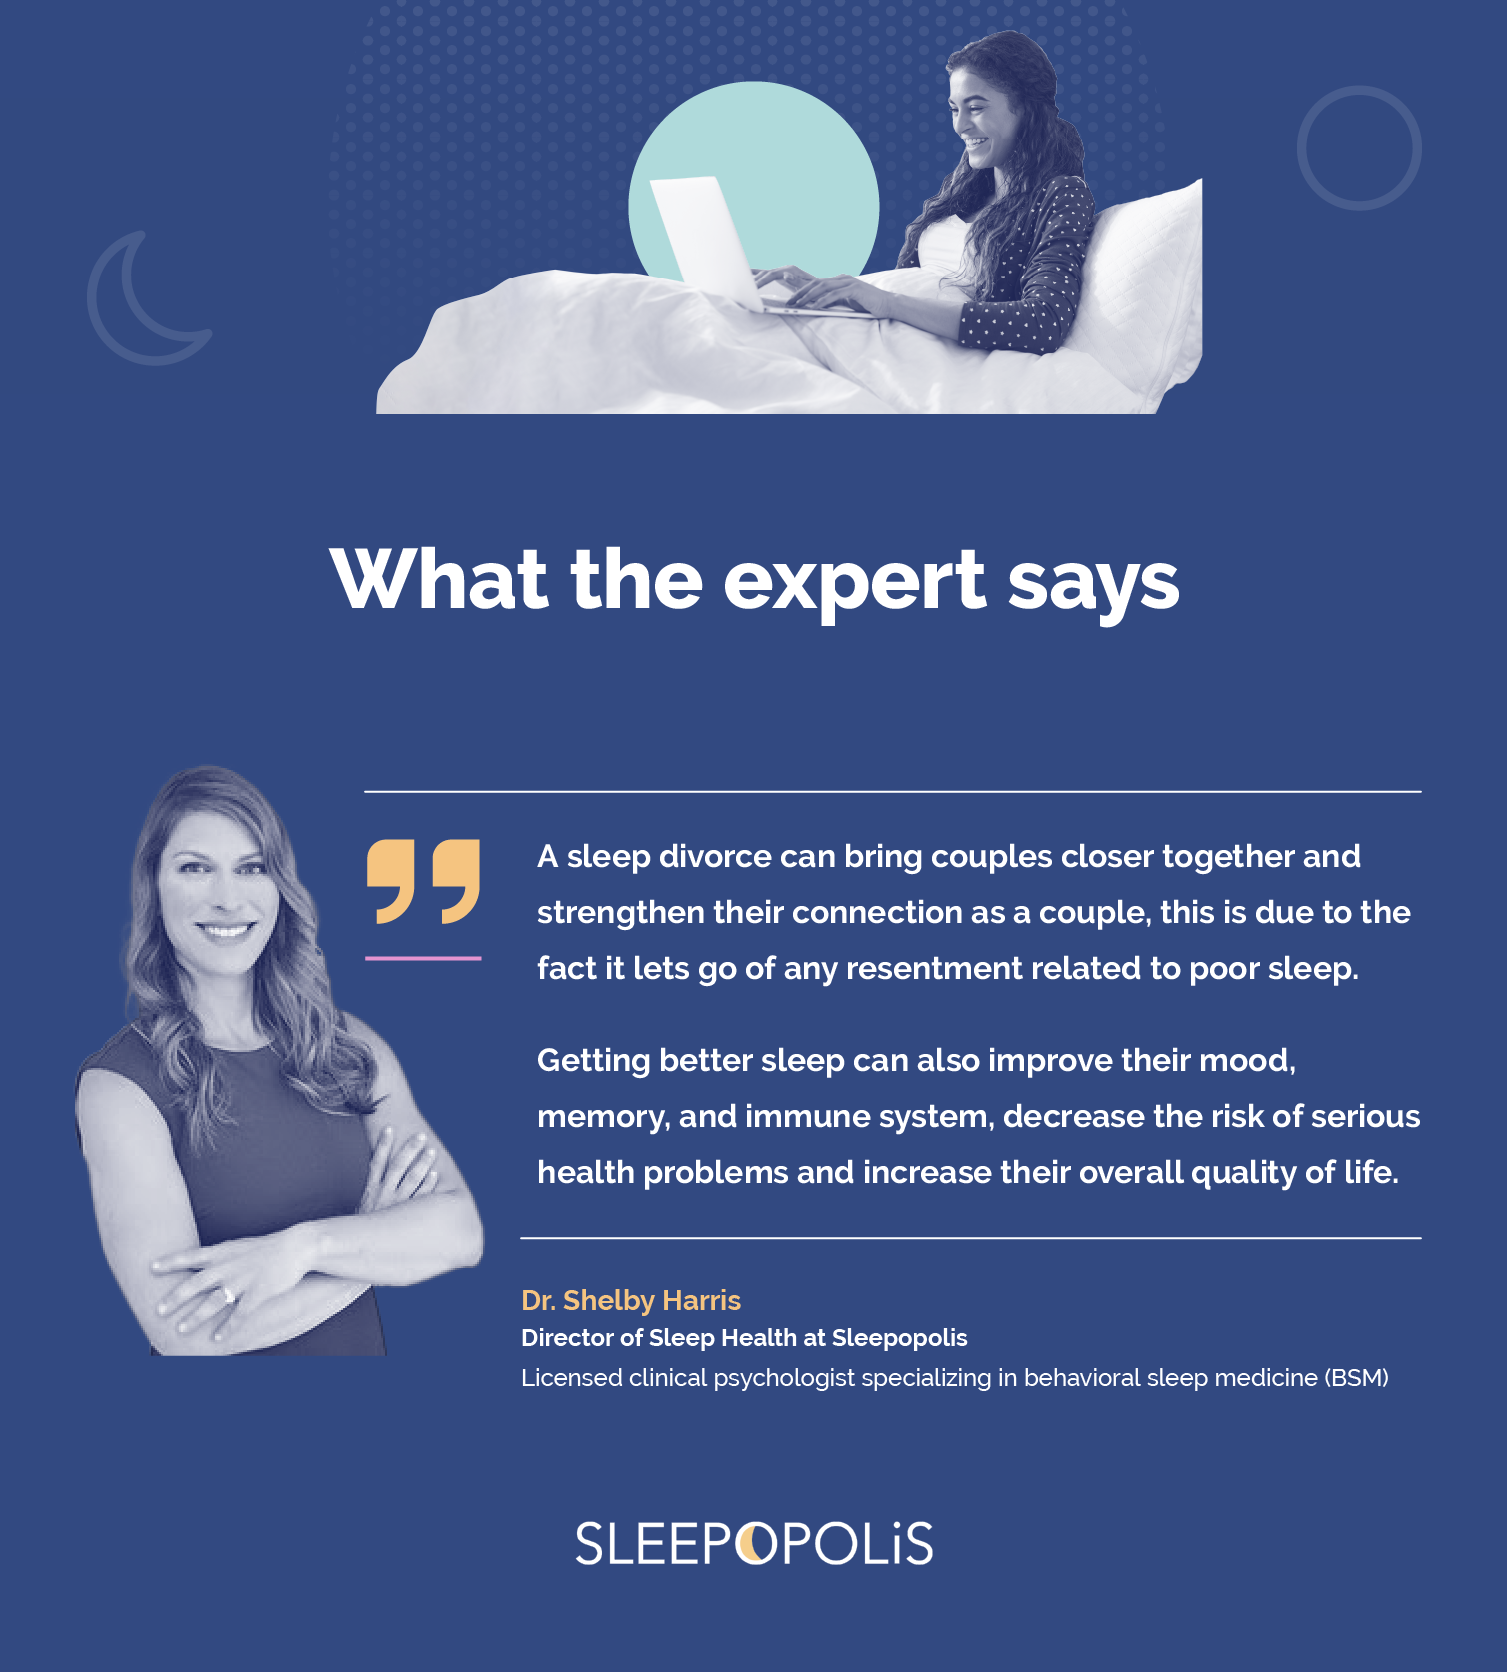 Graphic showing Dr. Shelby Harris including a quote about how sleep divorce can bring couples closer together.